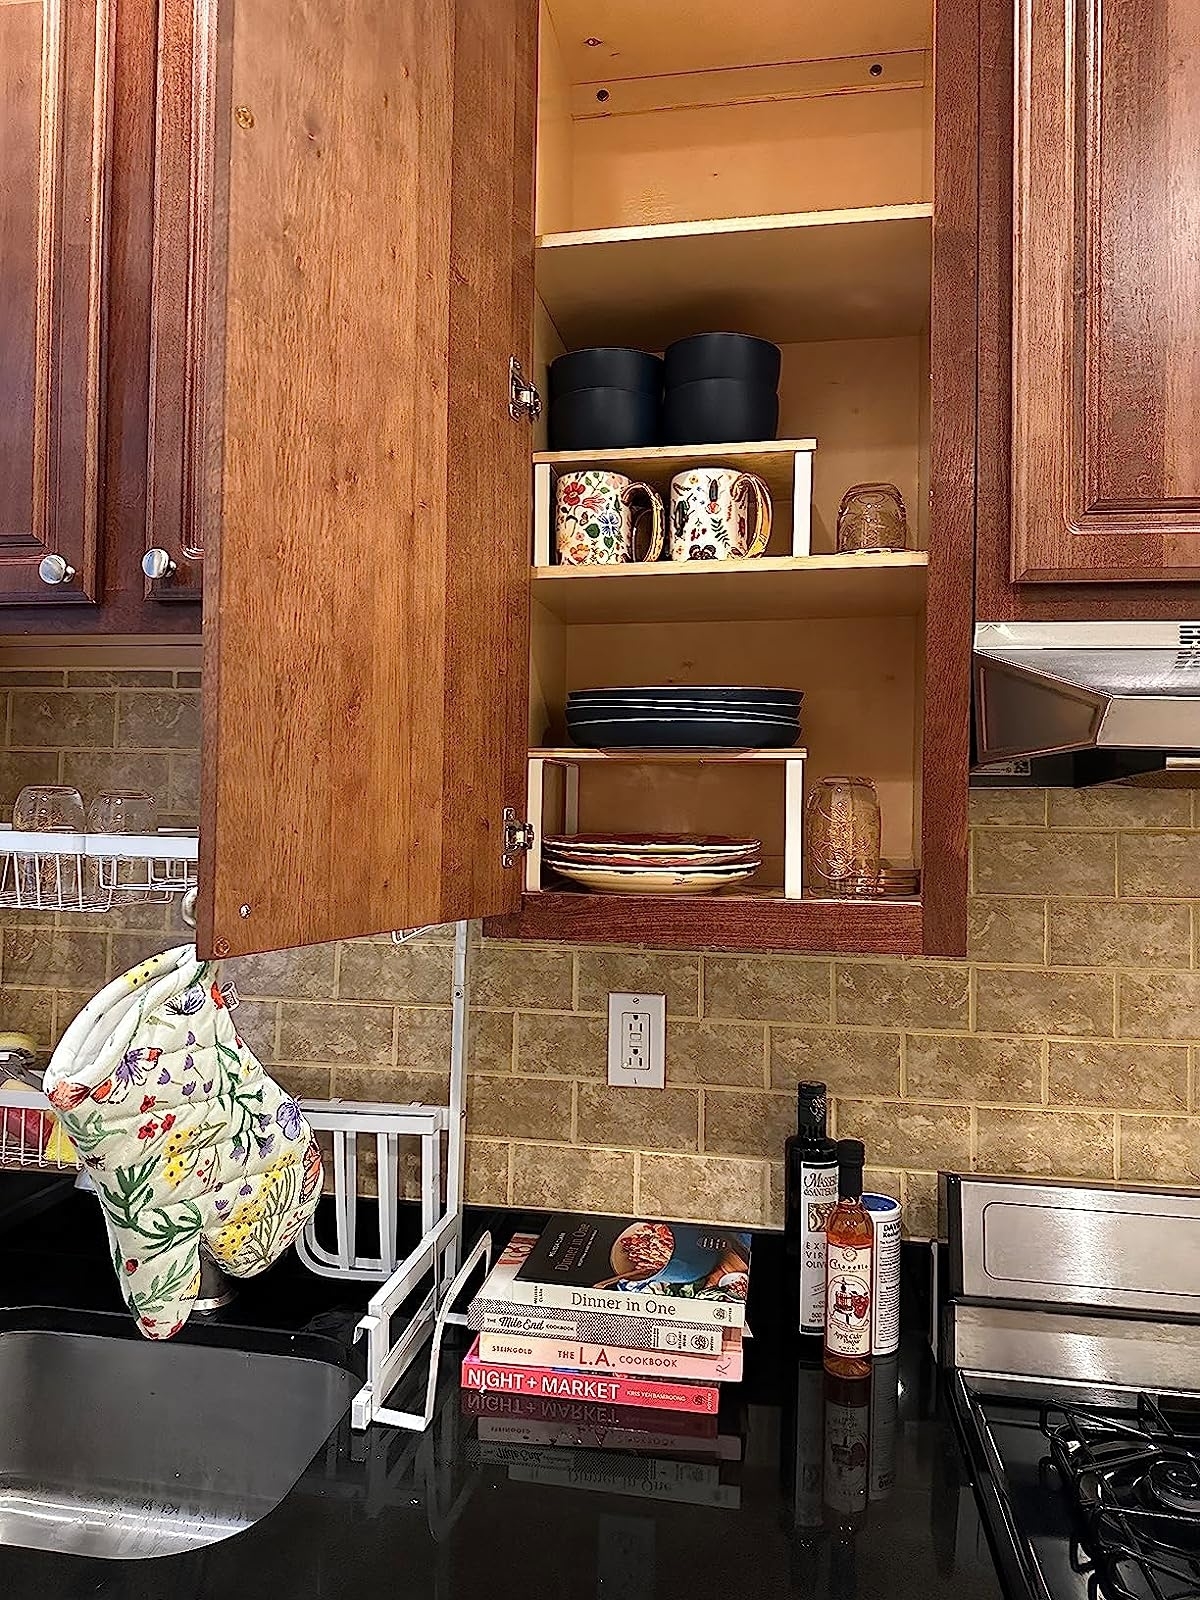 Reviewer image of the shelf organizers inside their kitchen cabinet